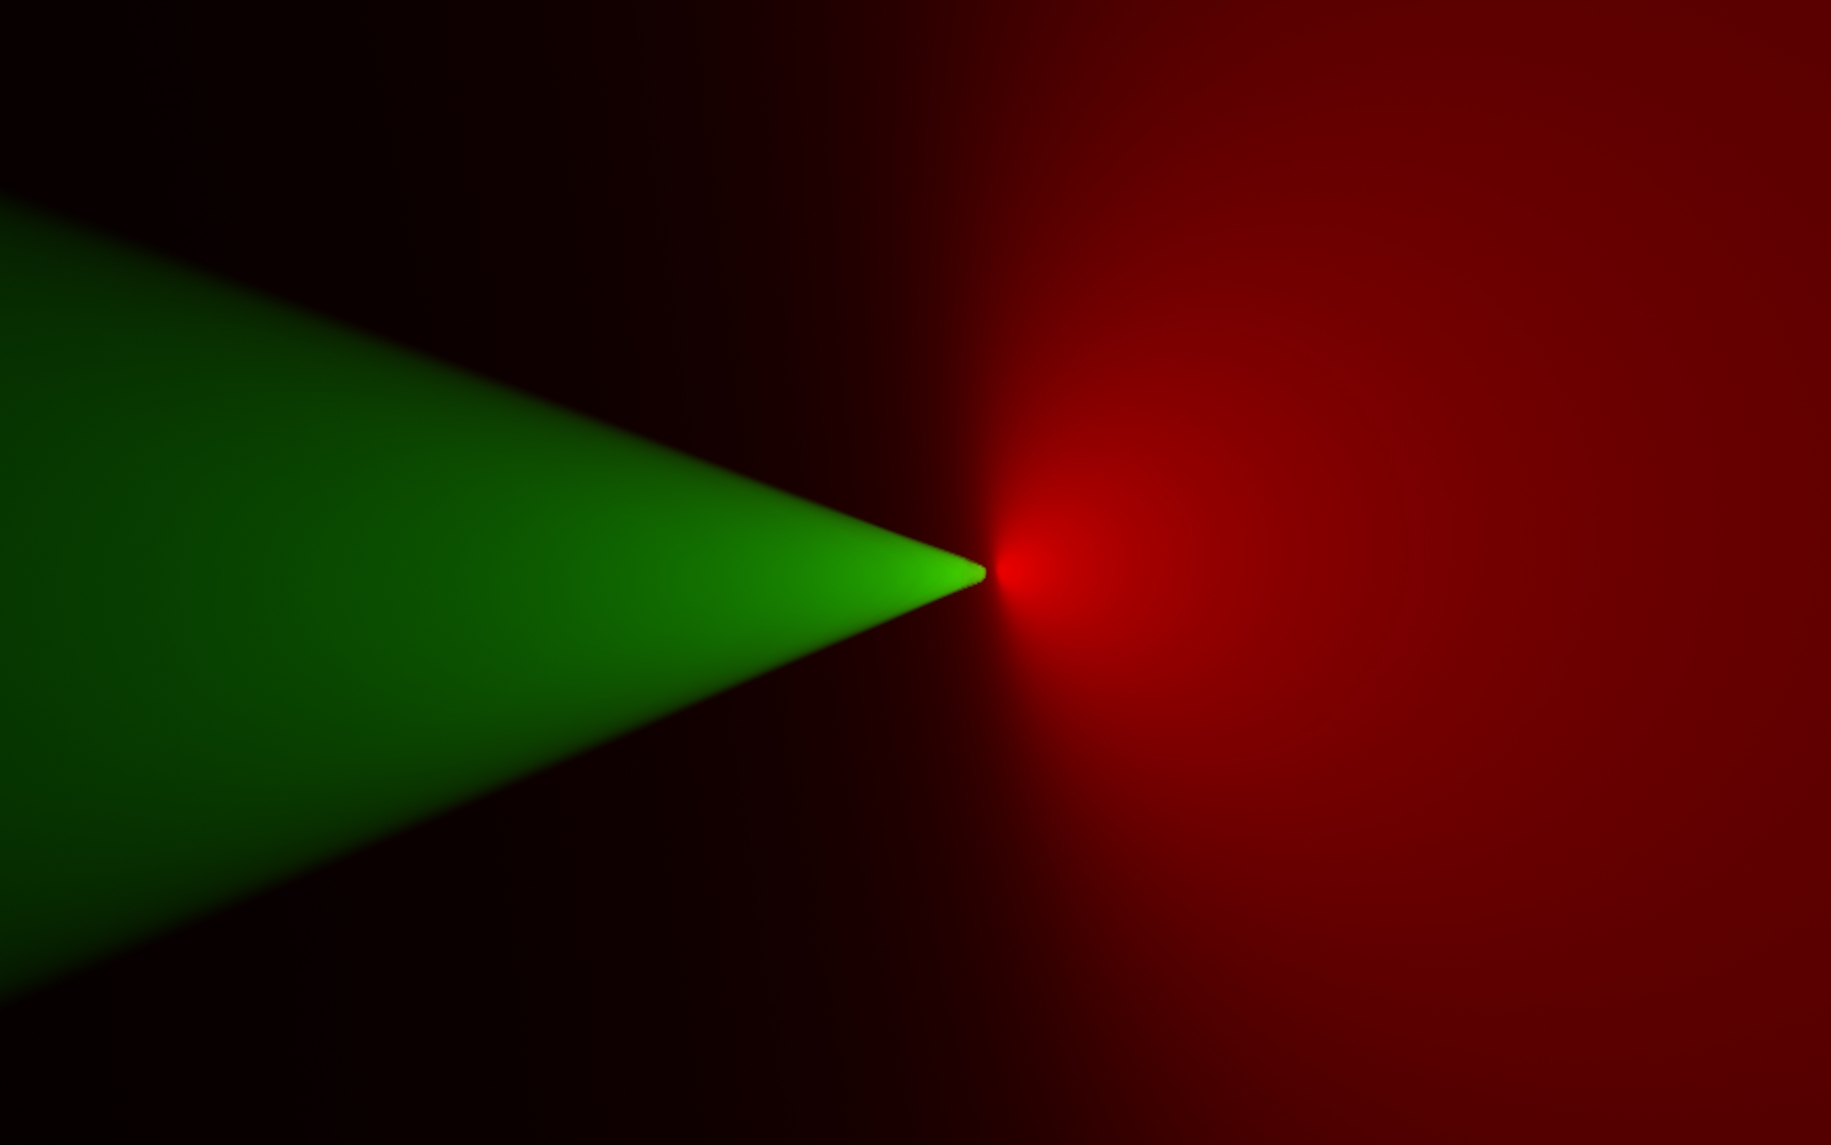 Two light beams, one pointing towards the camera, one perpendicular.